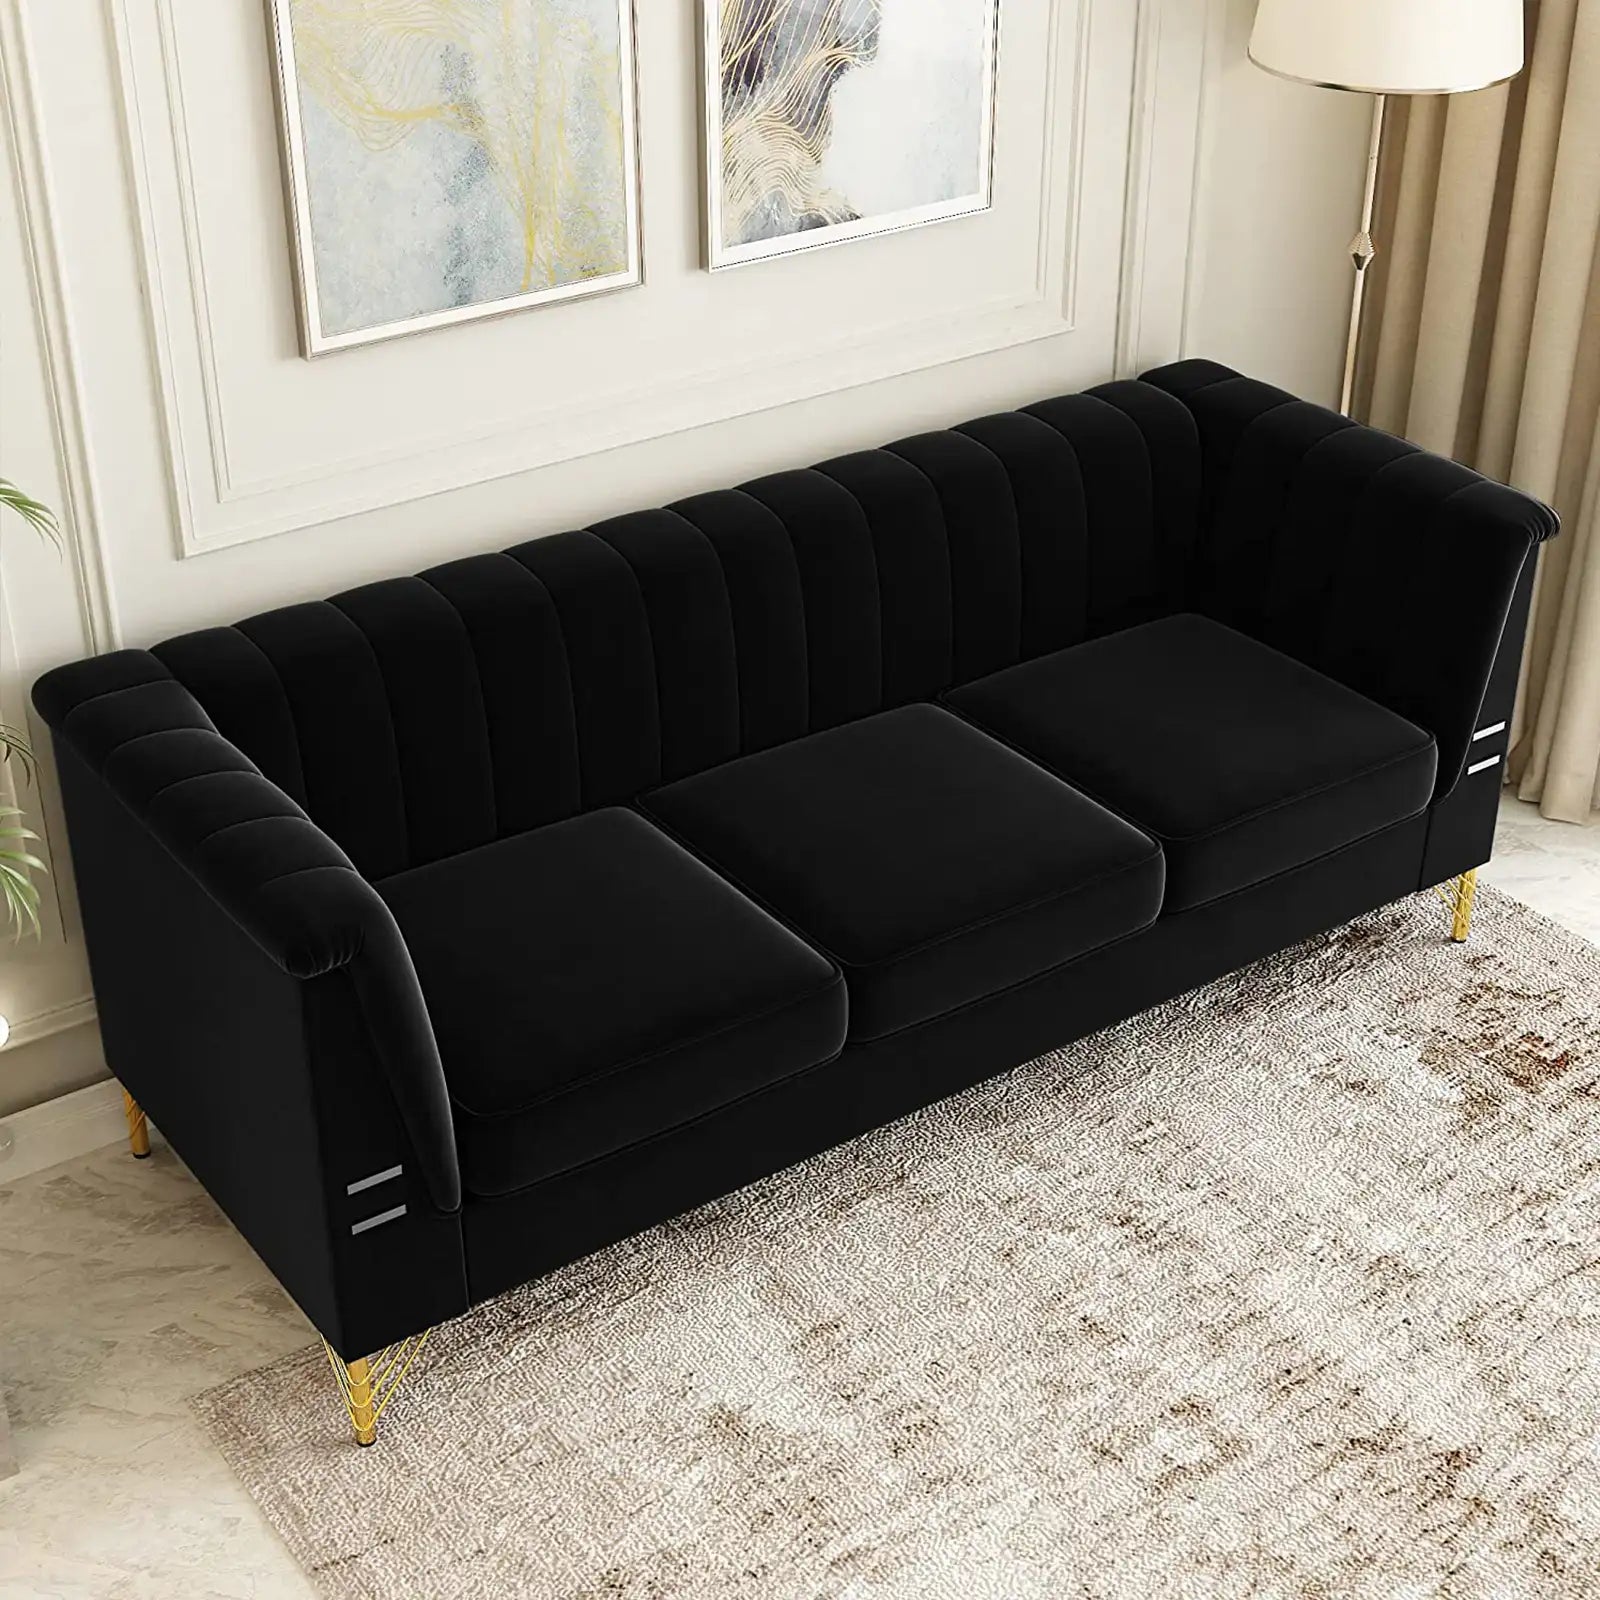 Velvet Sectional Sofa,3-Seater Couch with Soft Seat Metal Legs for Bedroom,Office,Apartment,Living Room